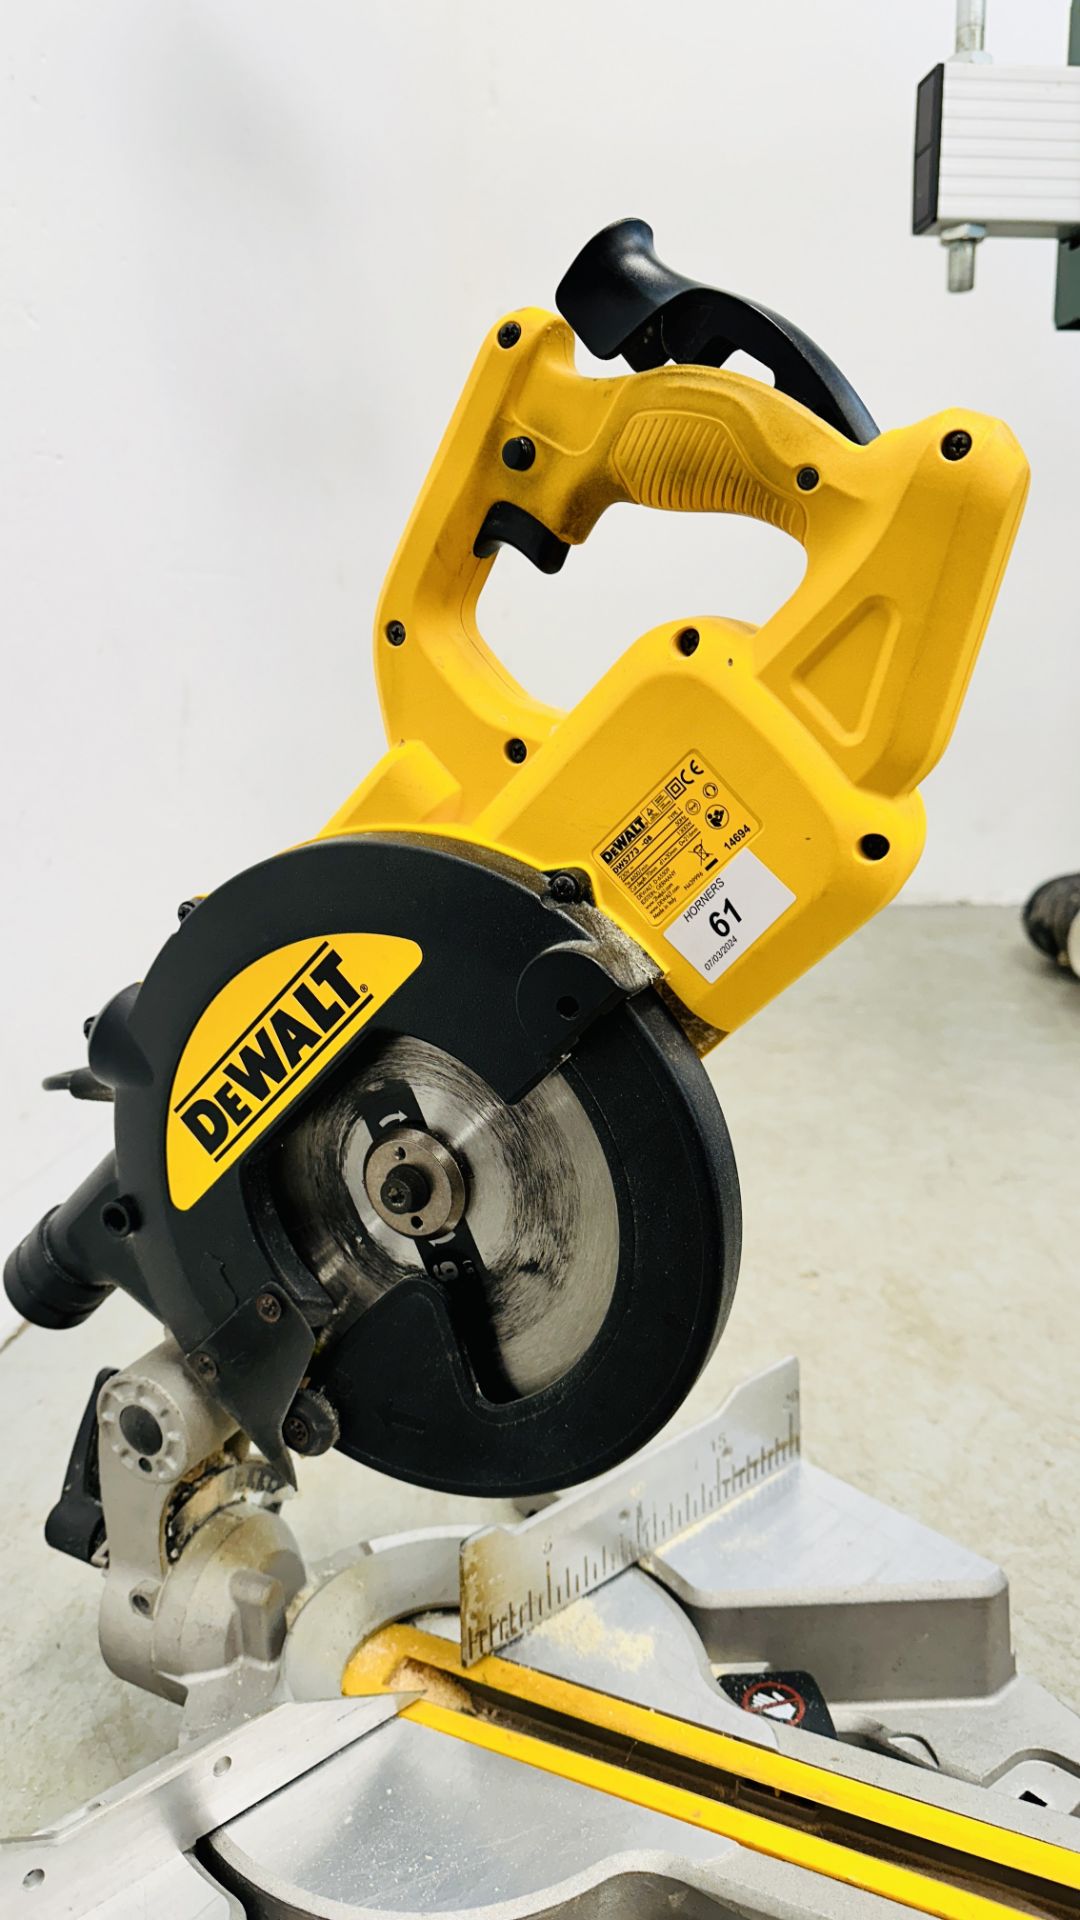 DE WALT COMPOUND MITRE SAW MODEL DWS773 - SOLD AS SEEN. THIS LOT IS SUBJECT TO VAT ON HAMMER PRICE. - Image 2 of 5